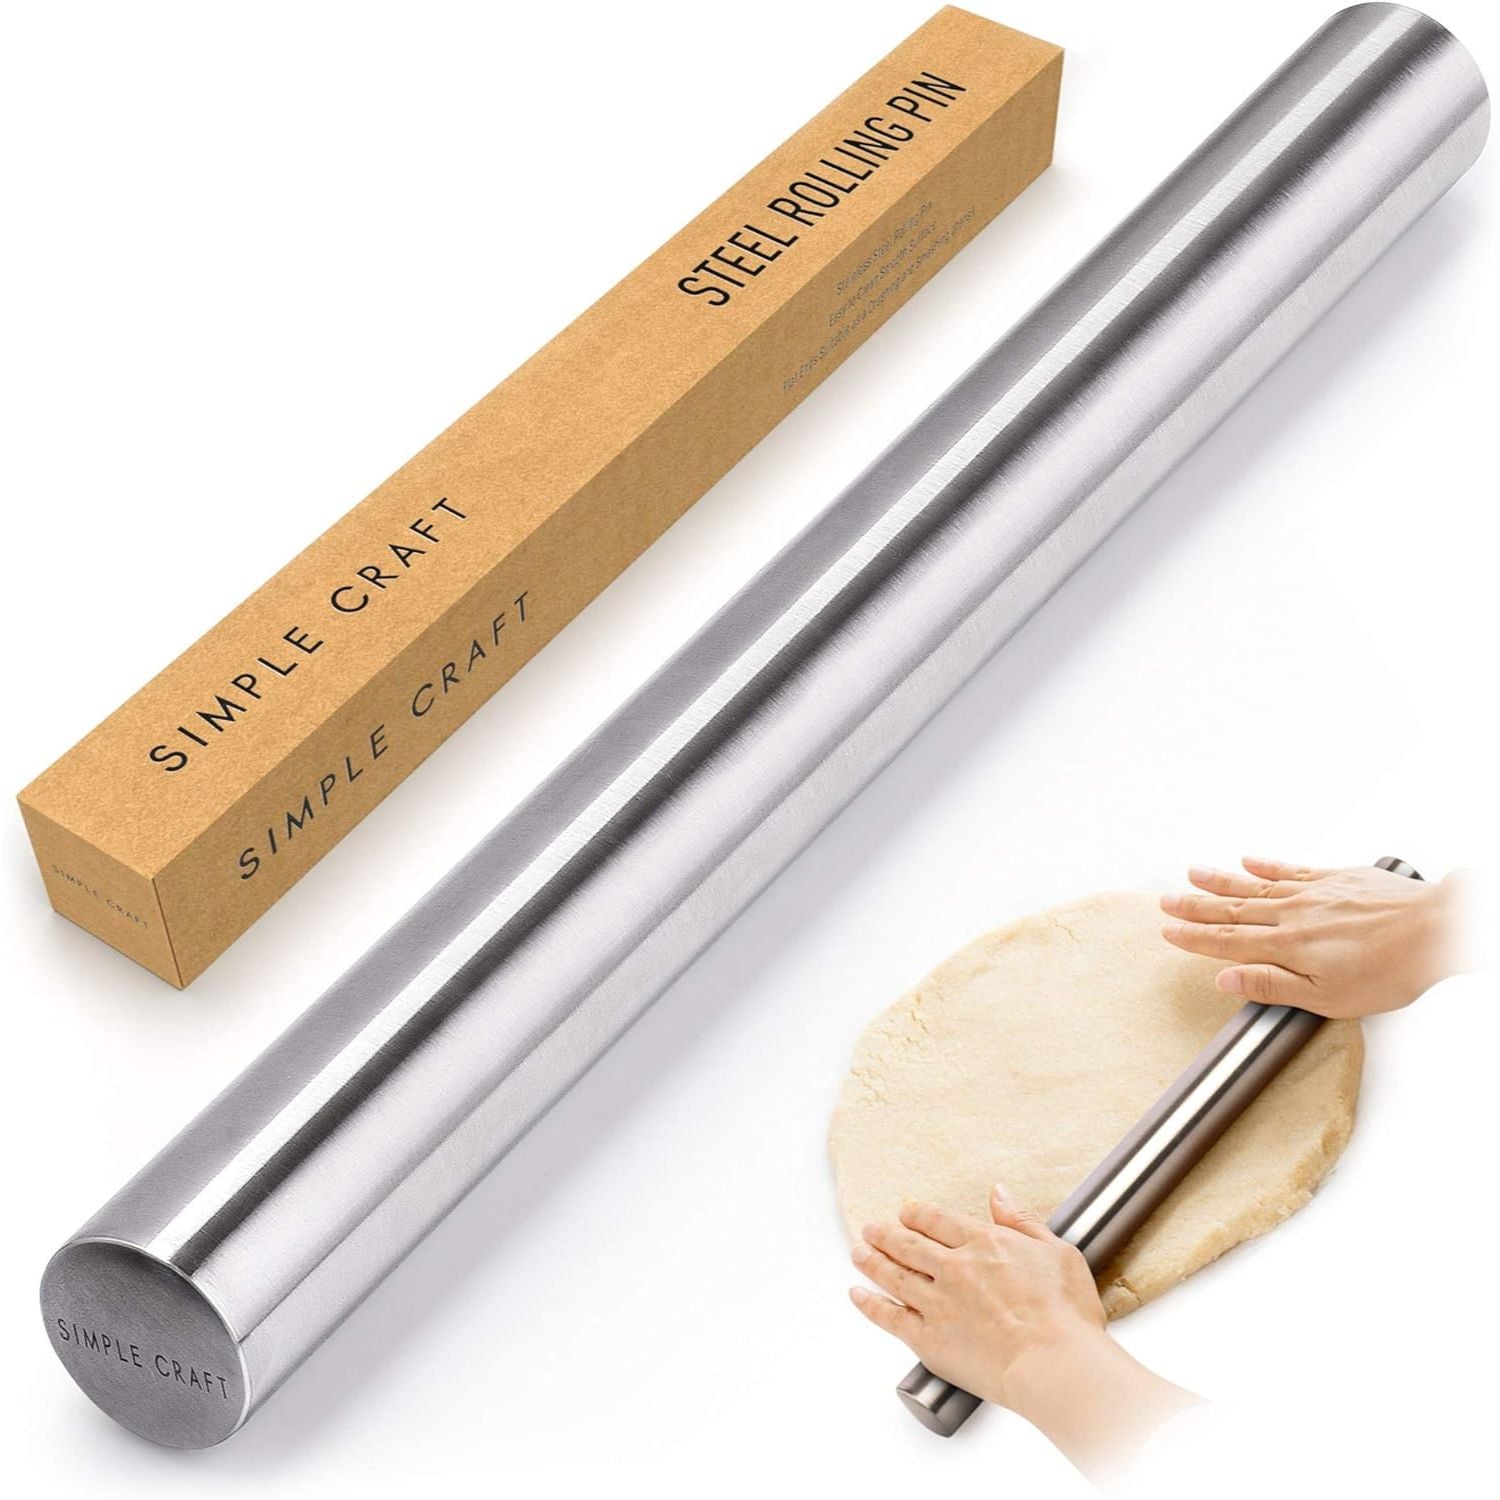 Simple Craft Premium 16” Rolling Pin For Making Cookies, Pastries, Pizza, Pies, and Pastas